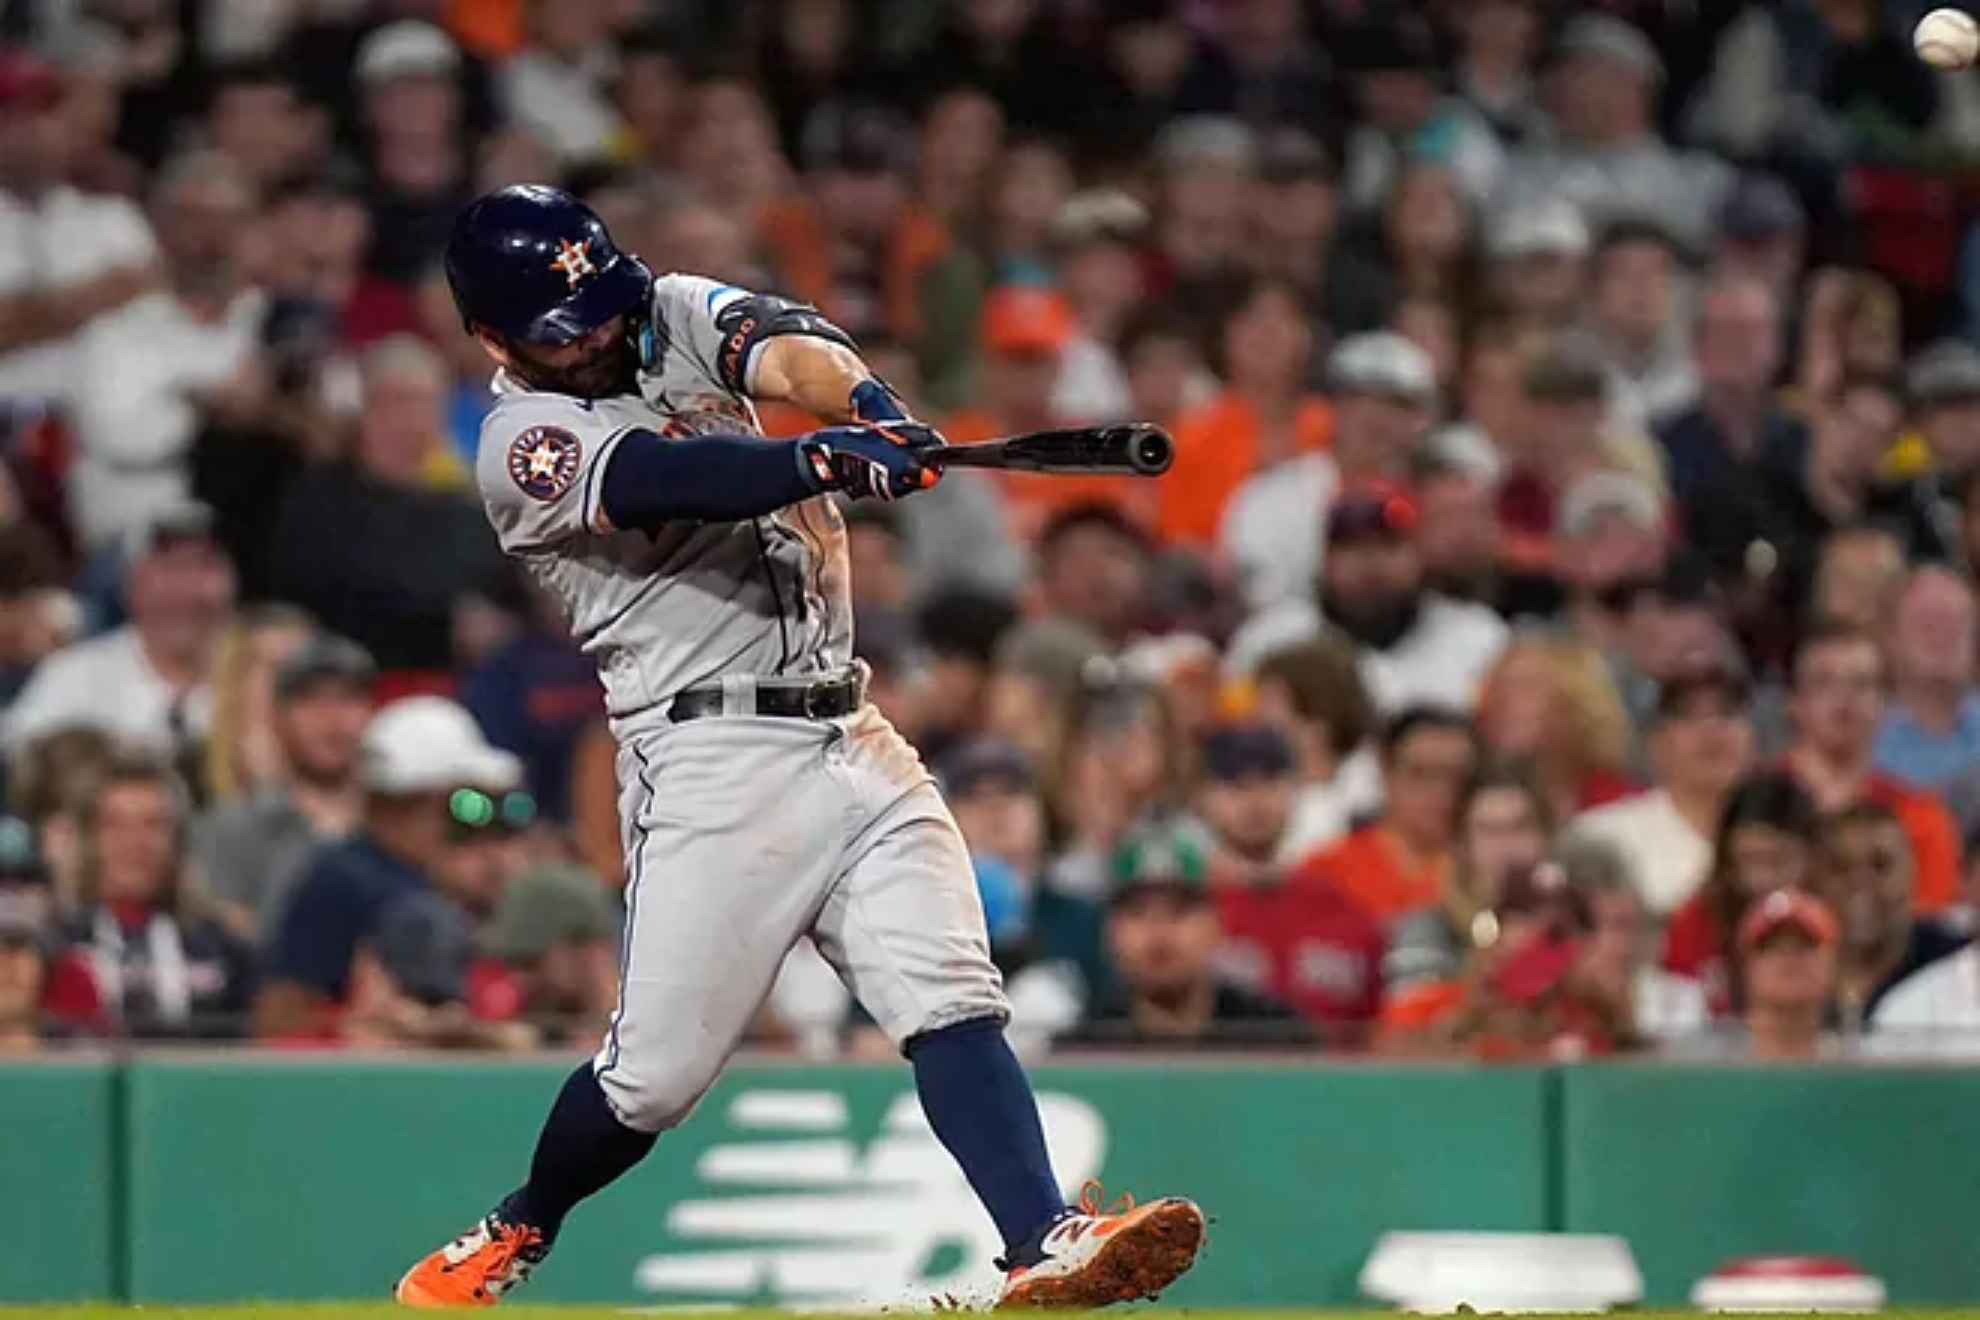 Jose Altuve hits a new milestone earning his first MLB cycle against the Red Sox